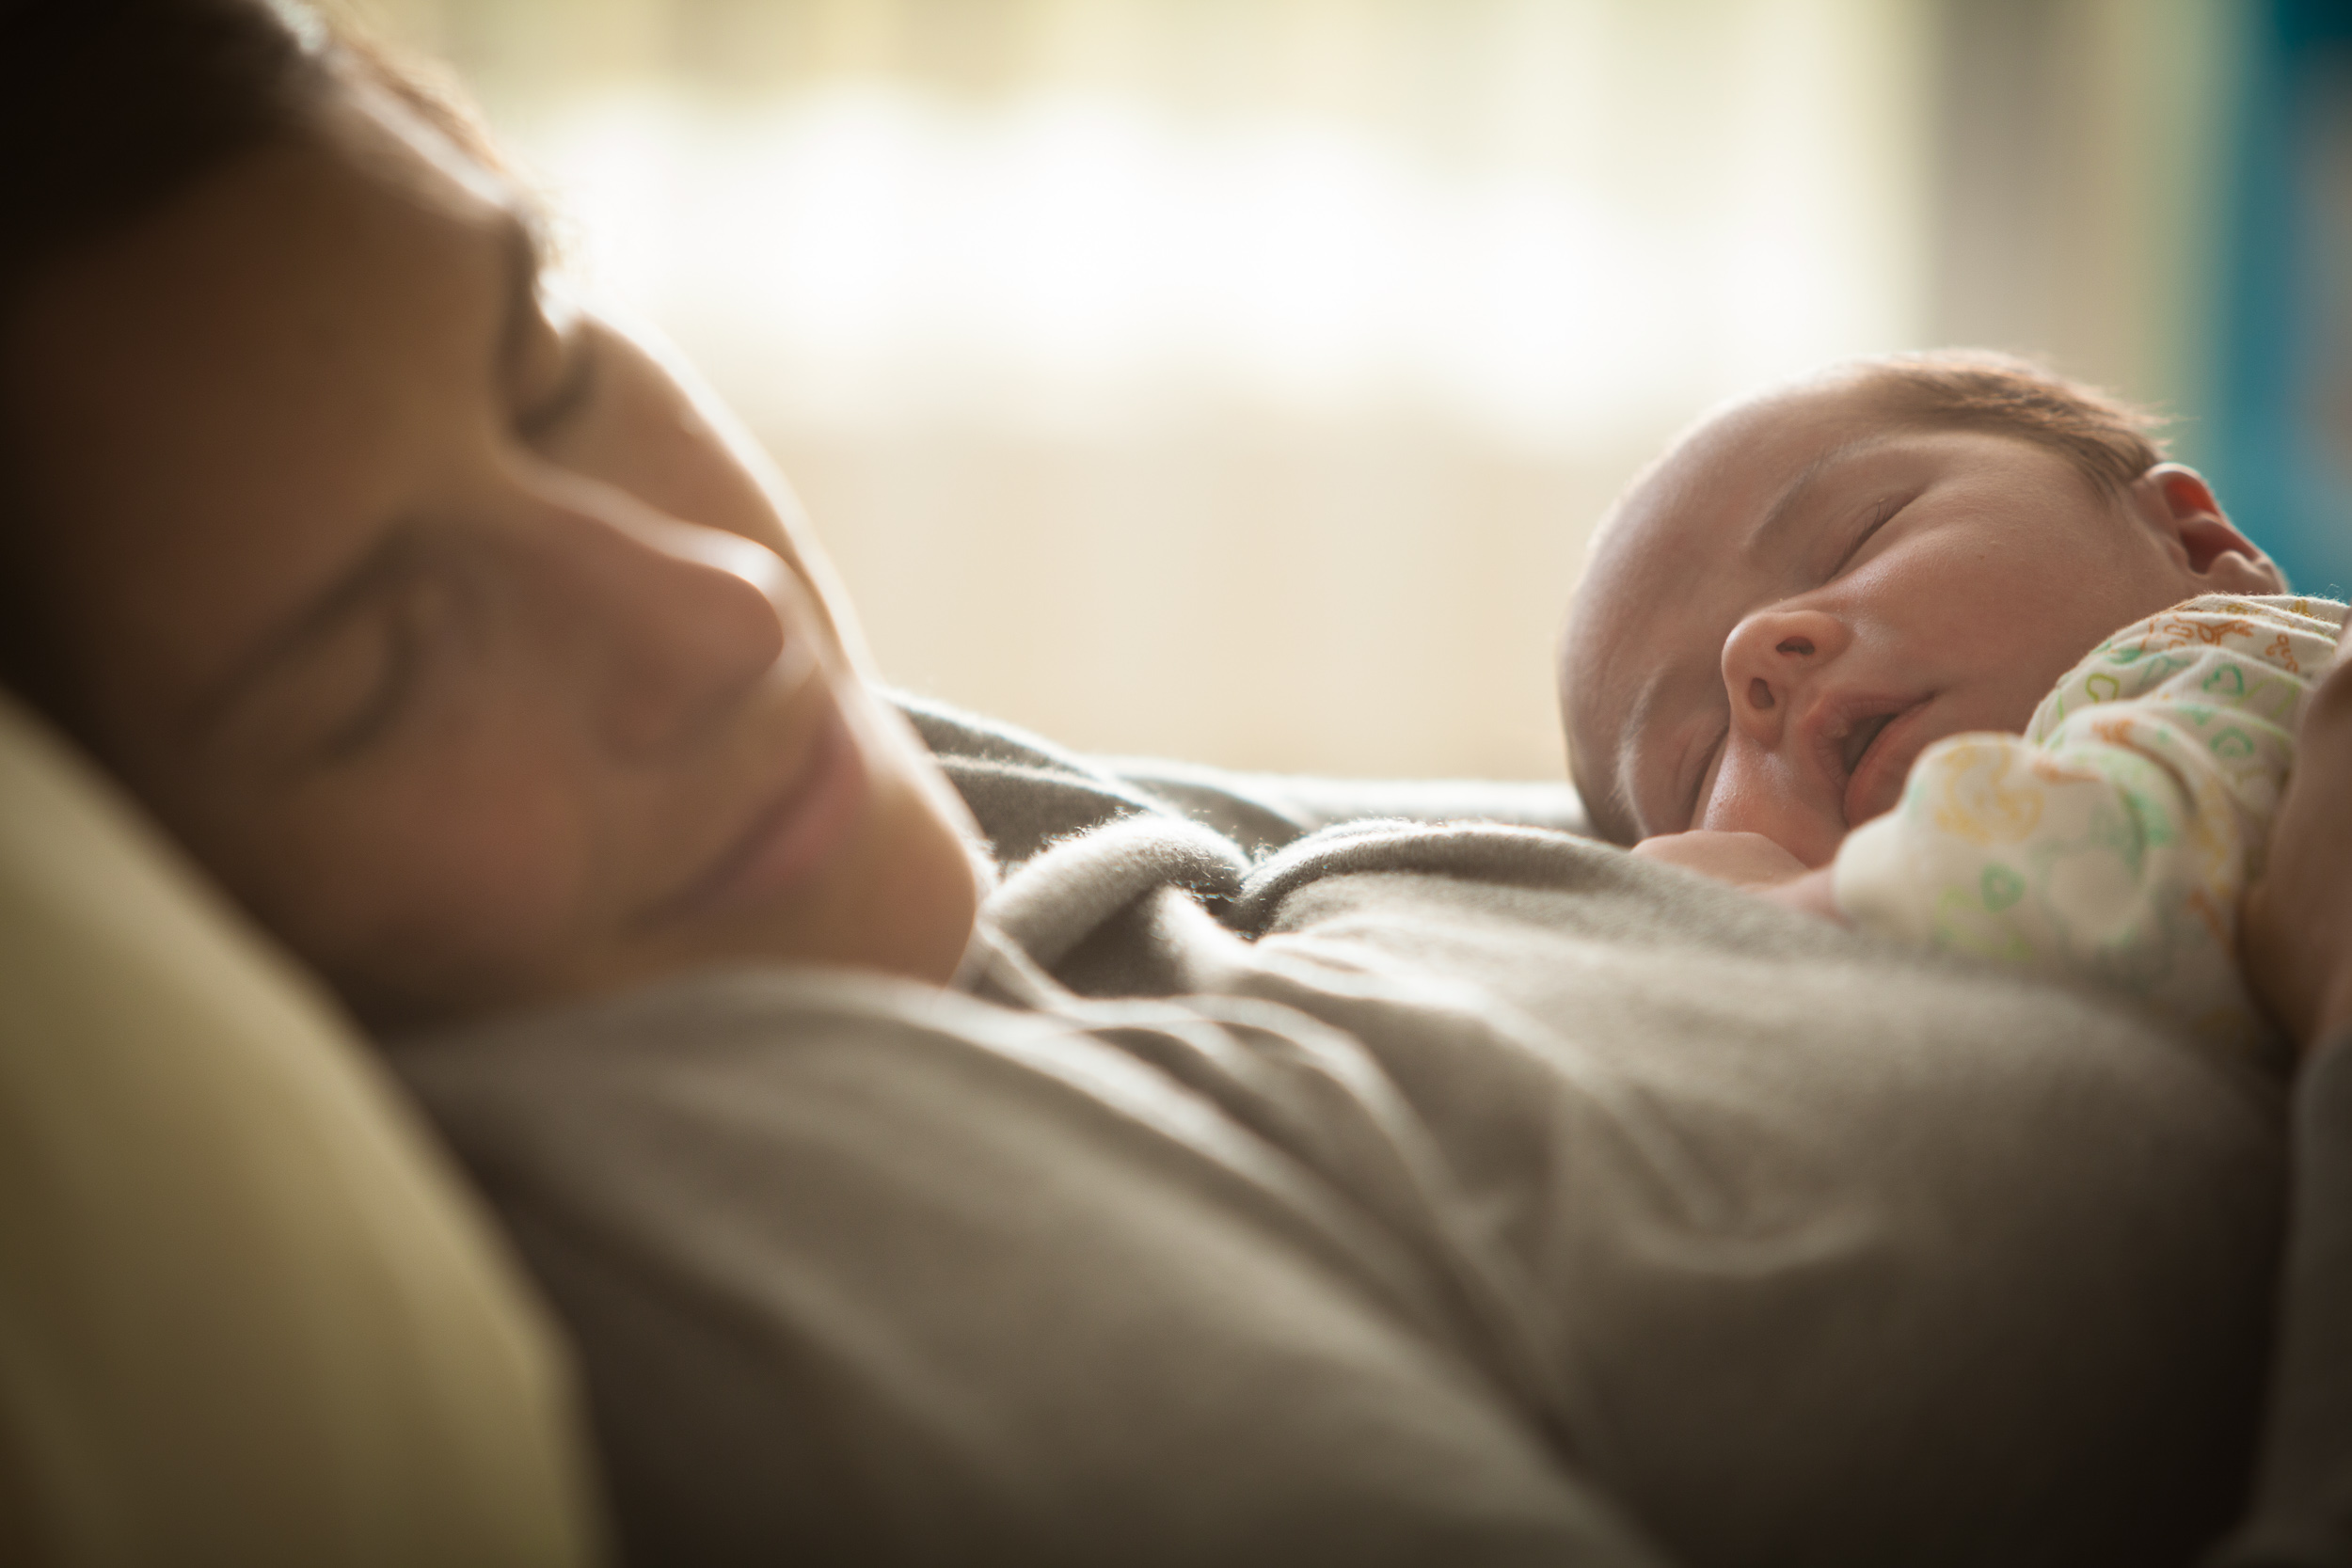 Woman and her newborn napping as the sun streams through the window of the nursery